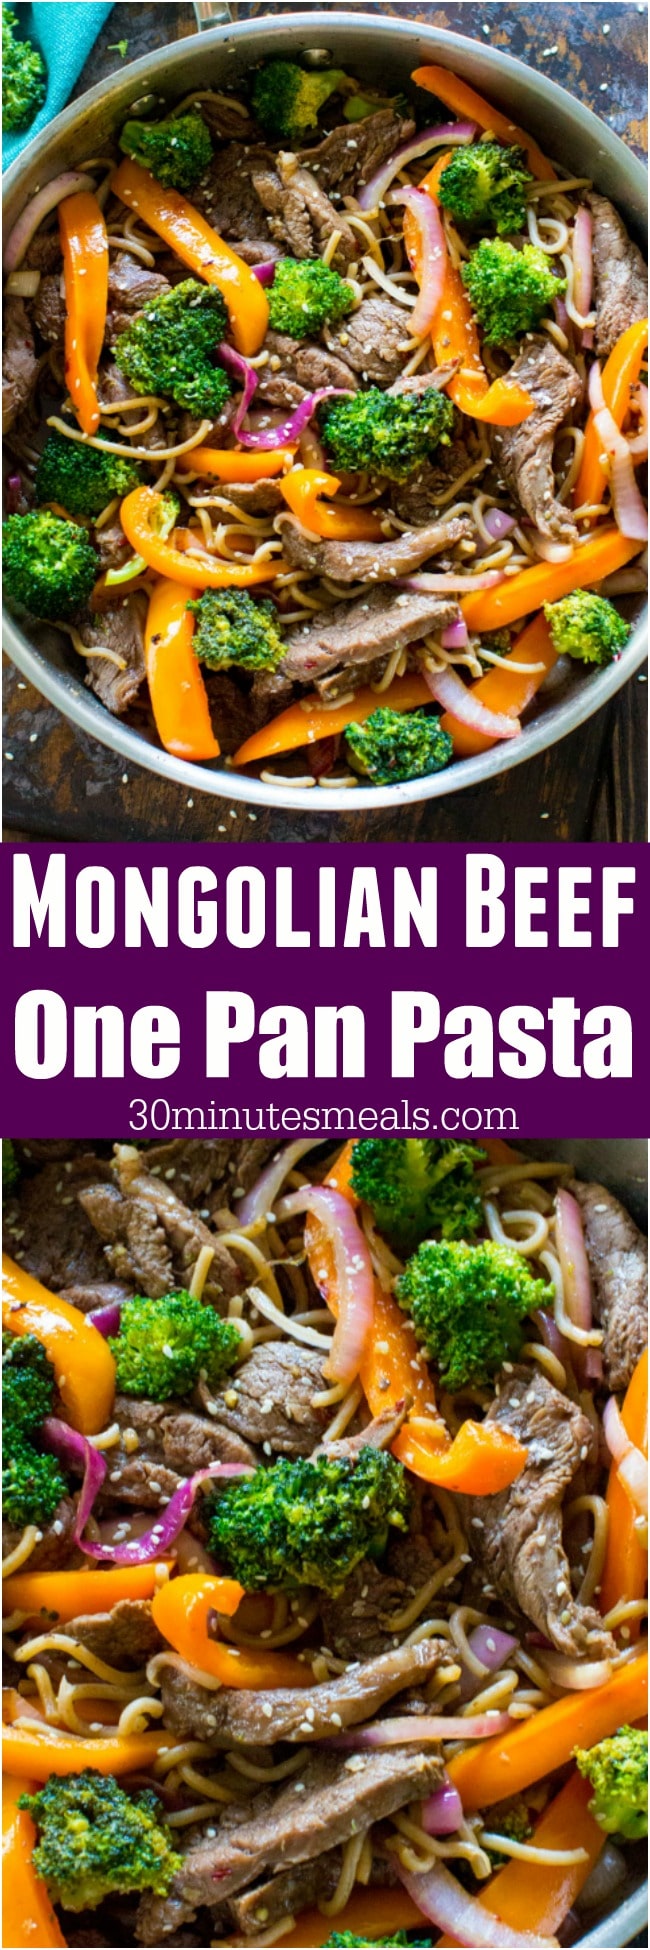 30 Minute Pasta Recipes are the perfect weeknight dinners, easily made in just one pan. These Skinny Mongolian Beef Noodles are tasty, full of flavor and hassle free.